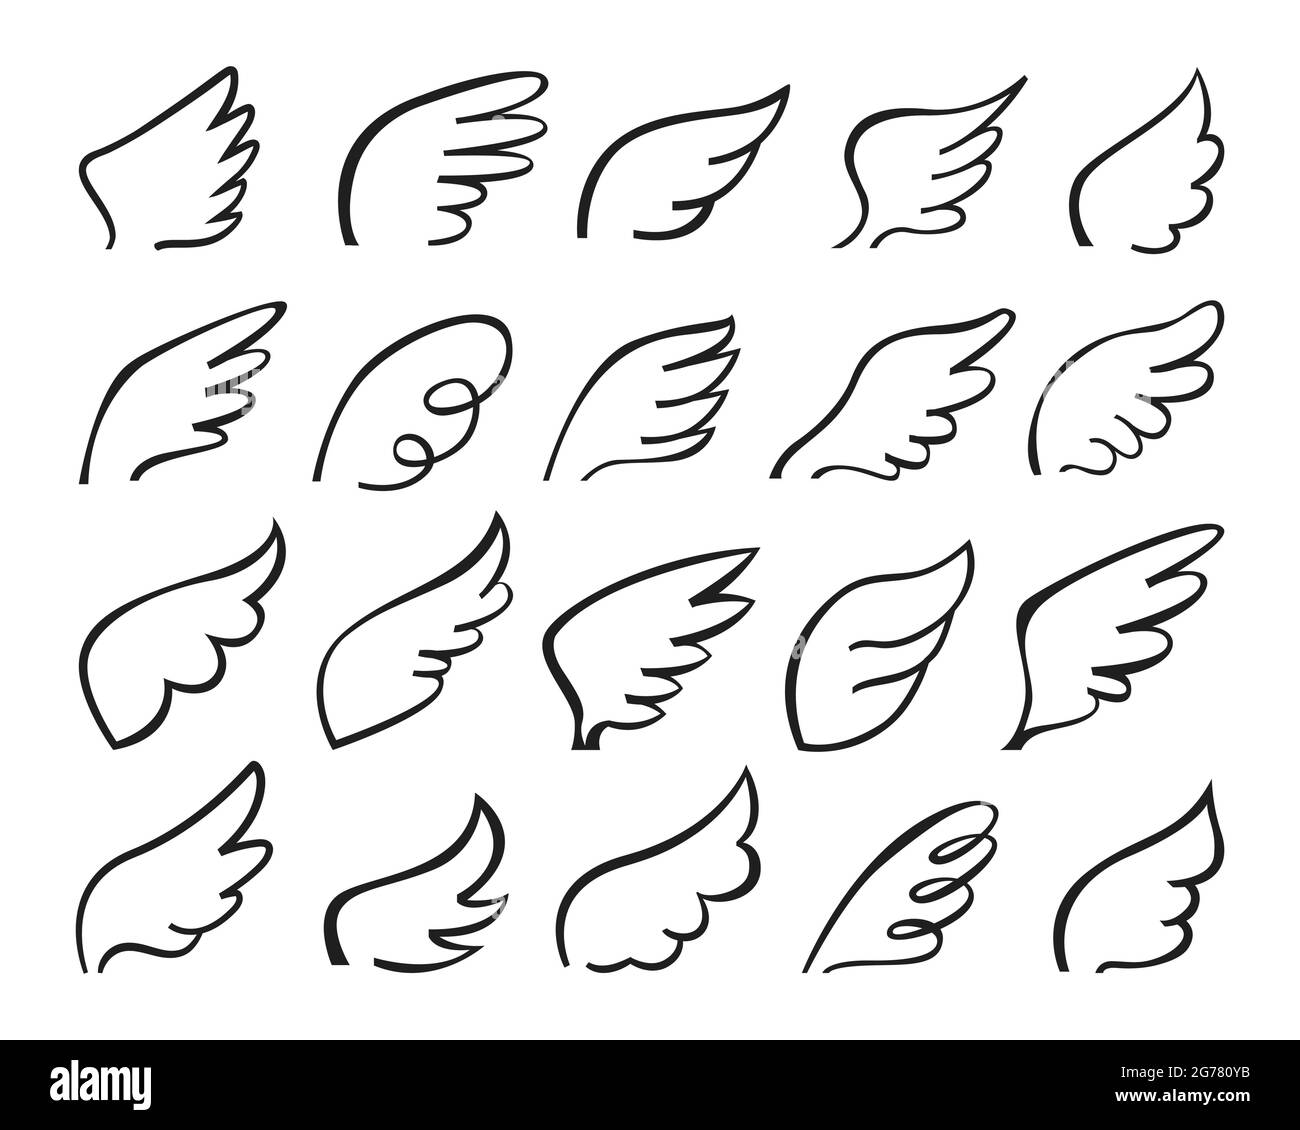 Wings Vector Flying Winged Angel With Wingcase Of Bird And Butterfly With  Wingspan Illustration Black Wingbeat Tattoo Silhouette Set Isolated On  White Background Stock Illustration - Download Image Now - iStock